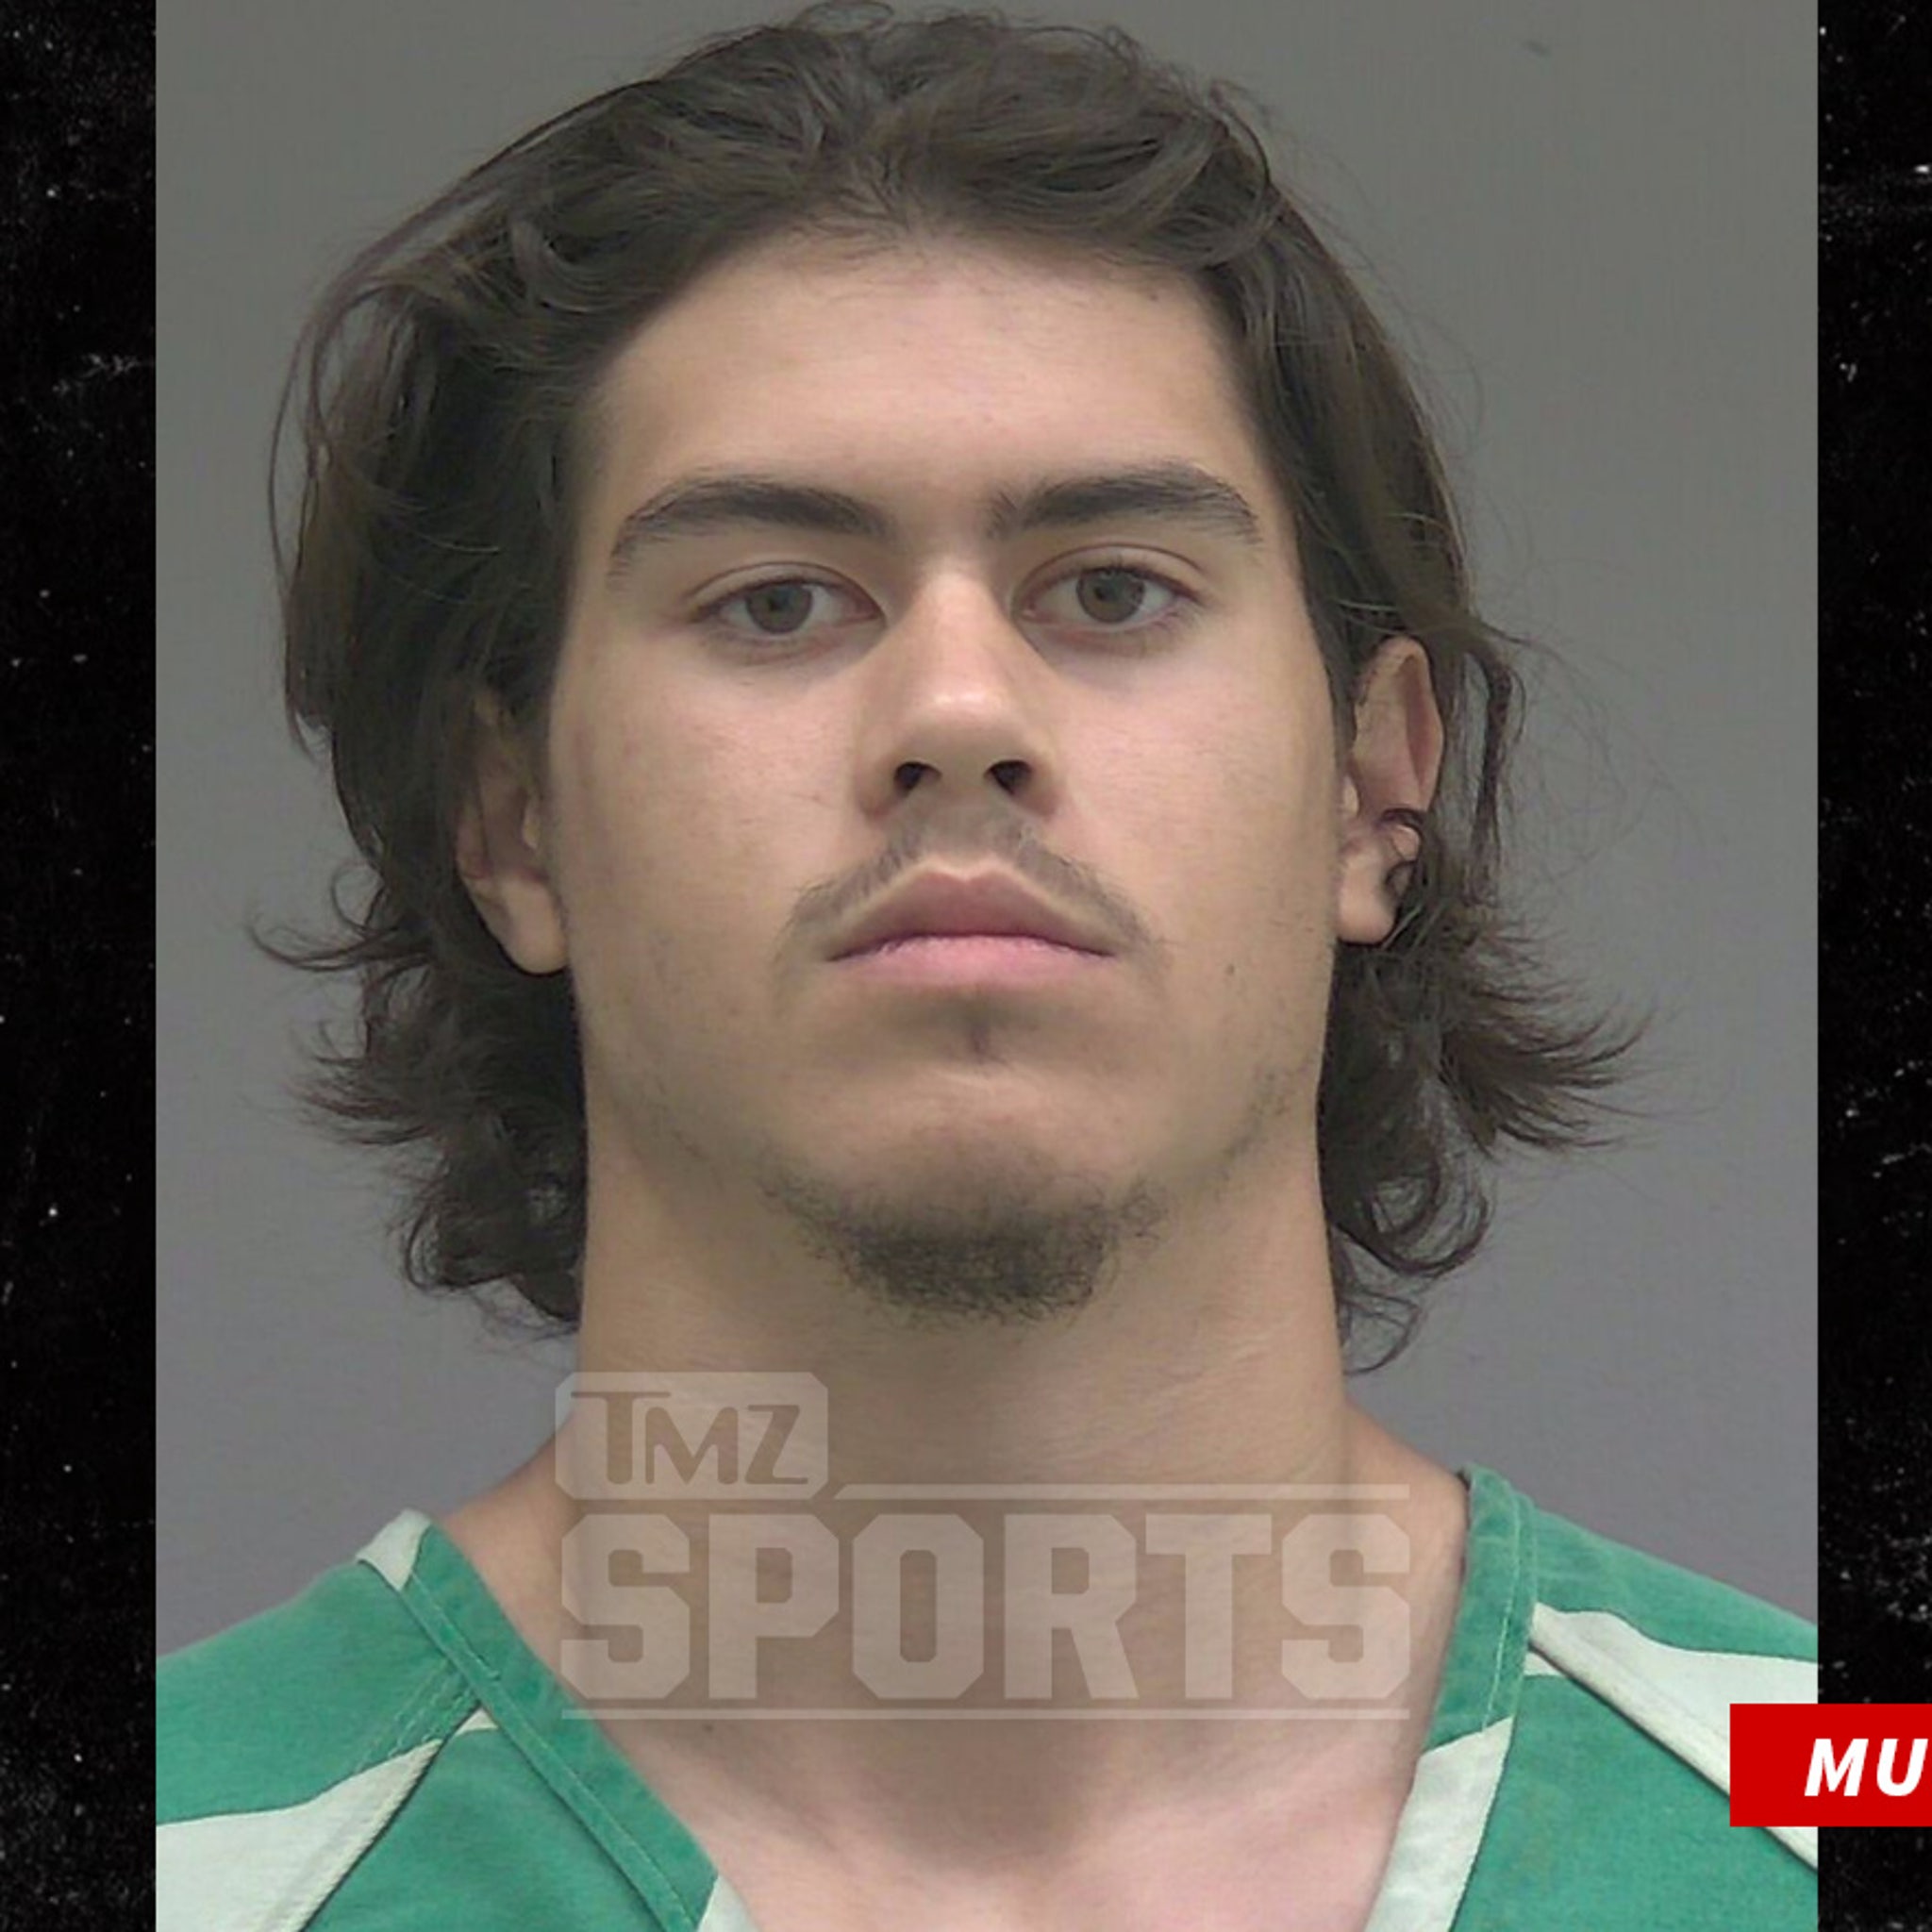 Xxx Called School - UF QB Jalen Kitna Shared Image Of Adult Male Having Sex With Child, Cops Say